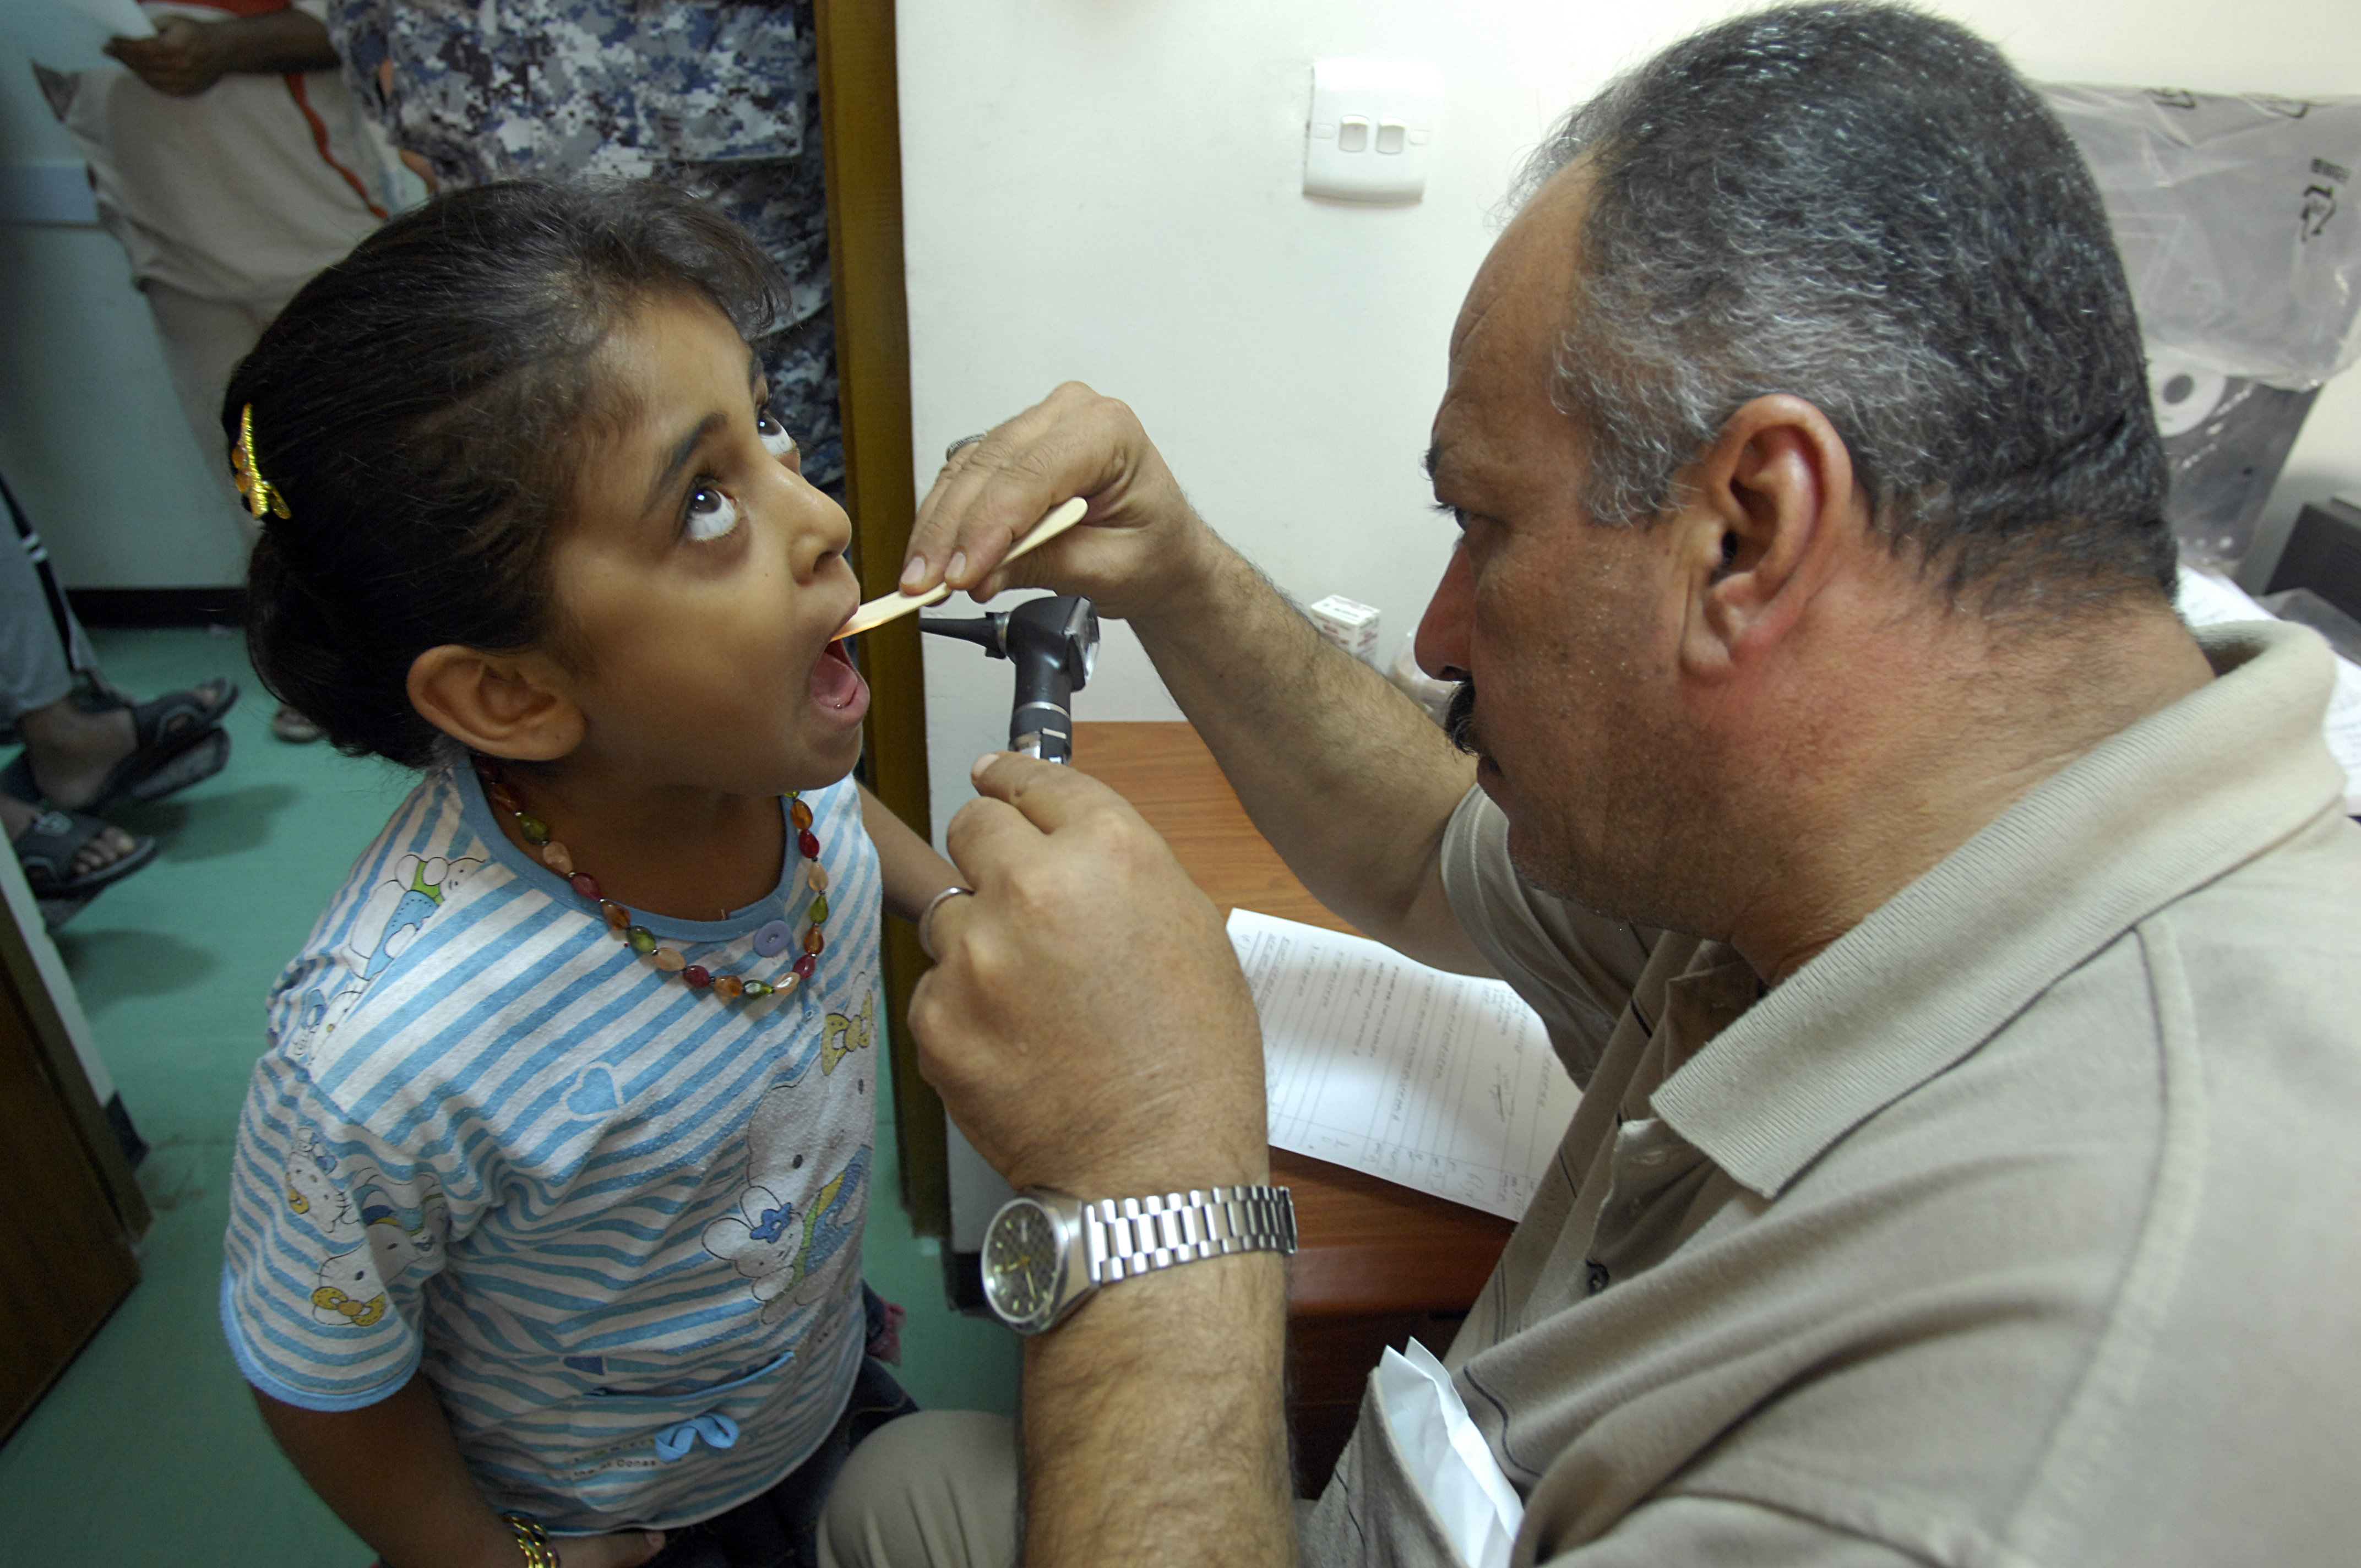 US Navy 080828-N-0292S-005 An Iraqi doctor checks a child's throat during an examination at a free health clinic during a combined medical event for local Iraqi families